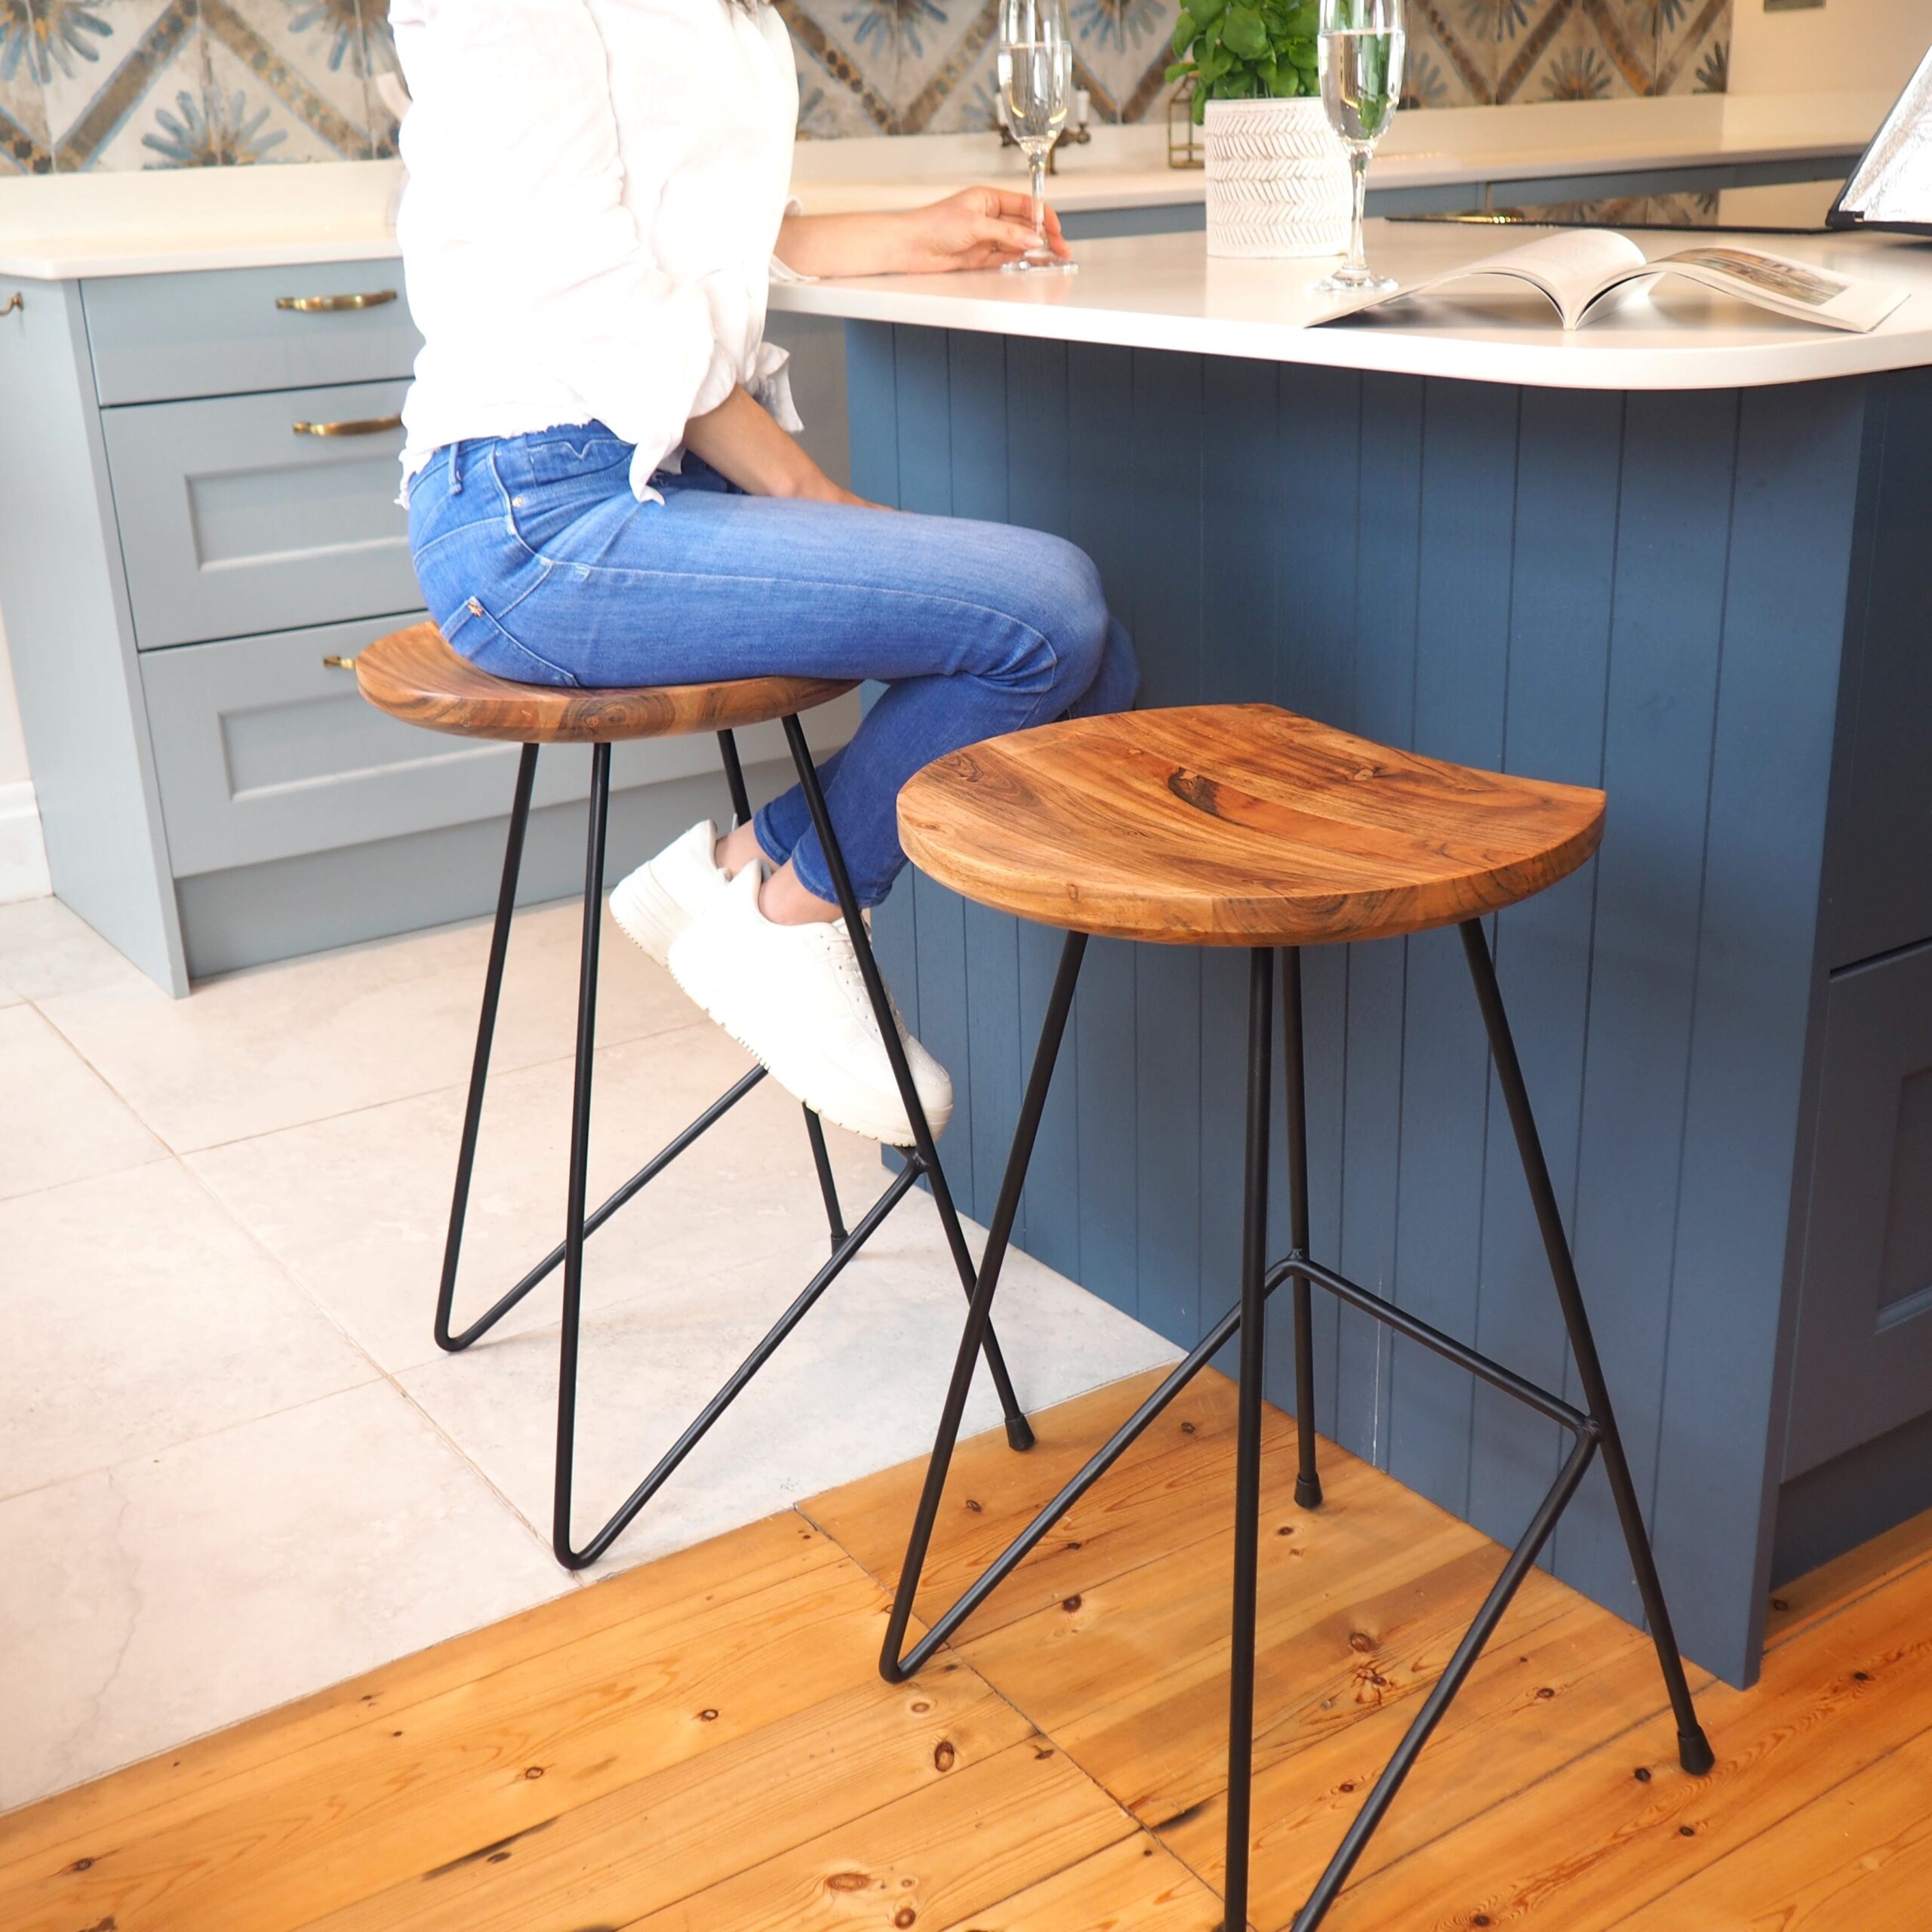 Woman sitting on industrial bar stool in front of blue kitchen island